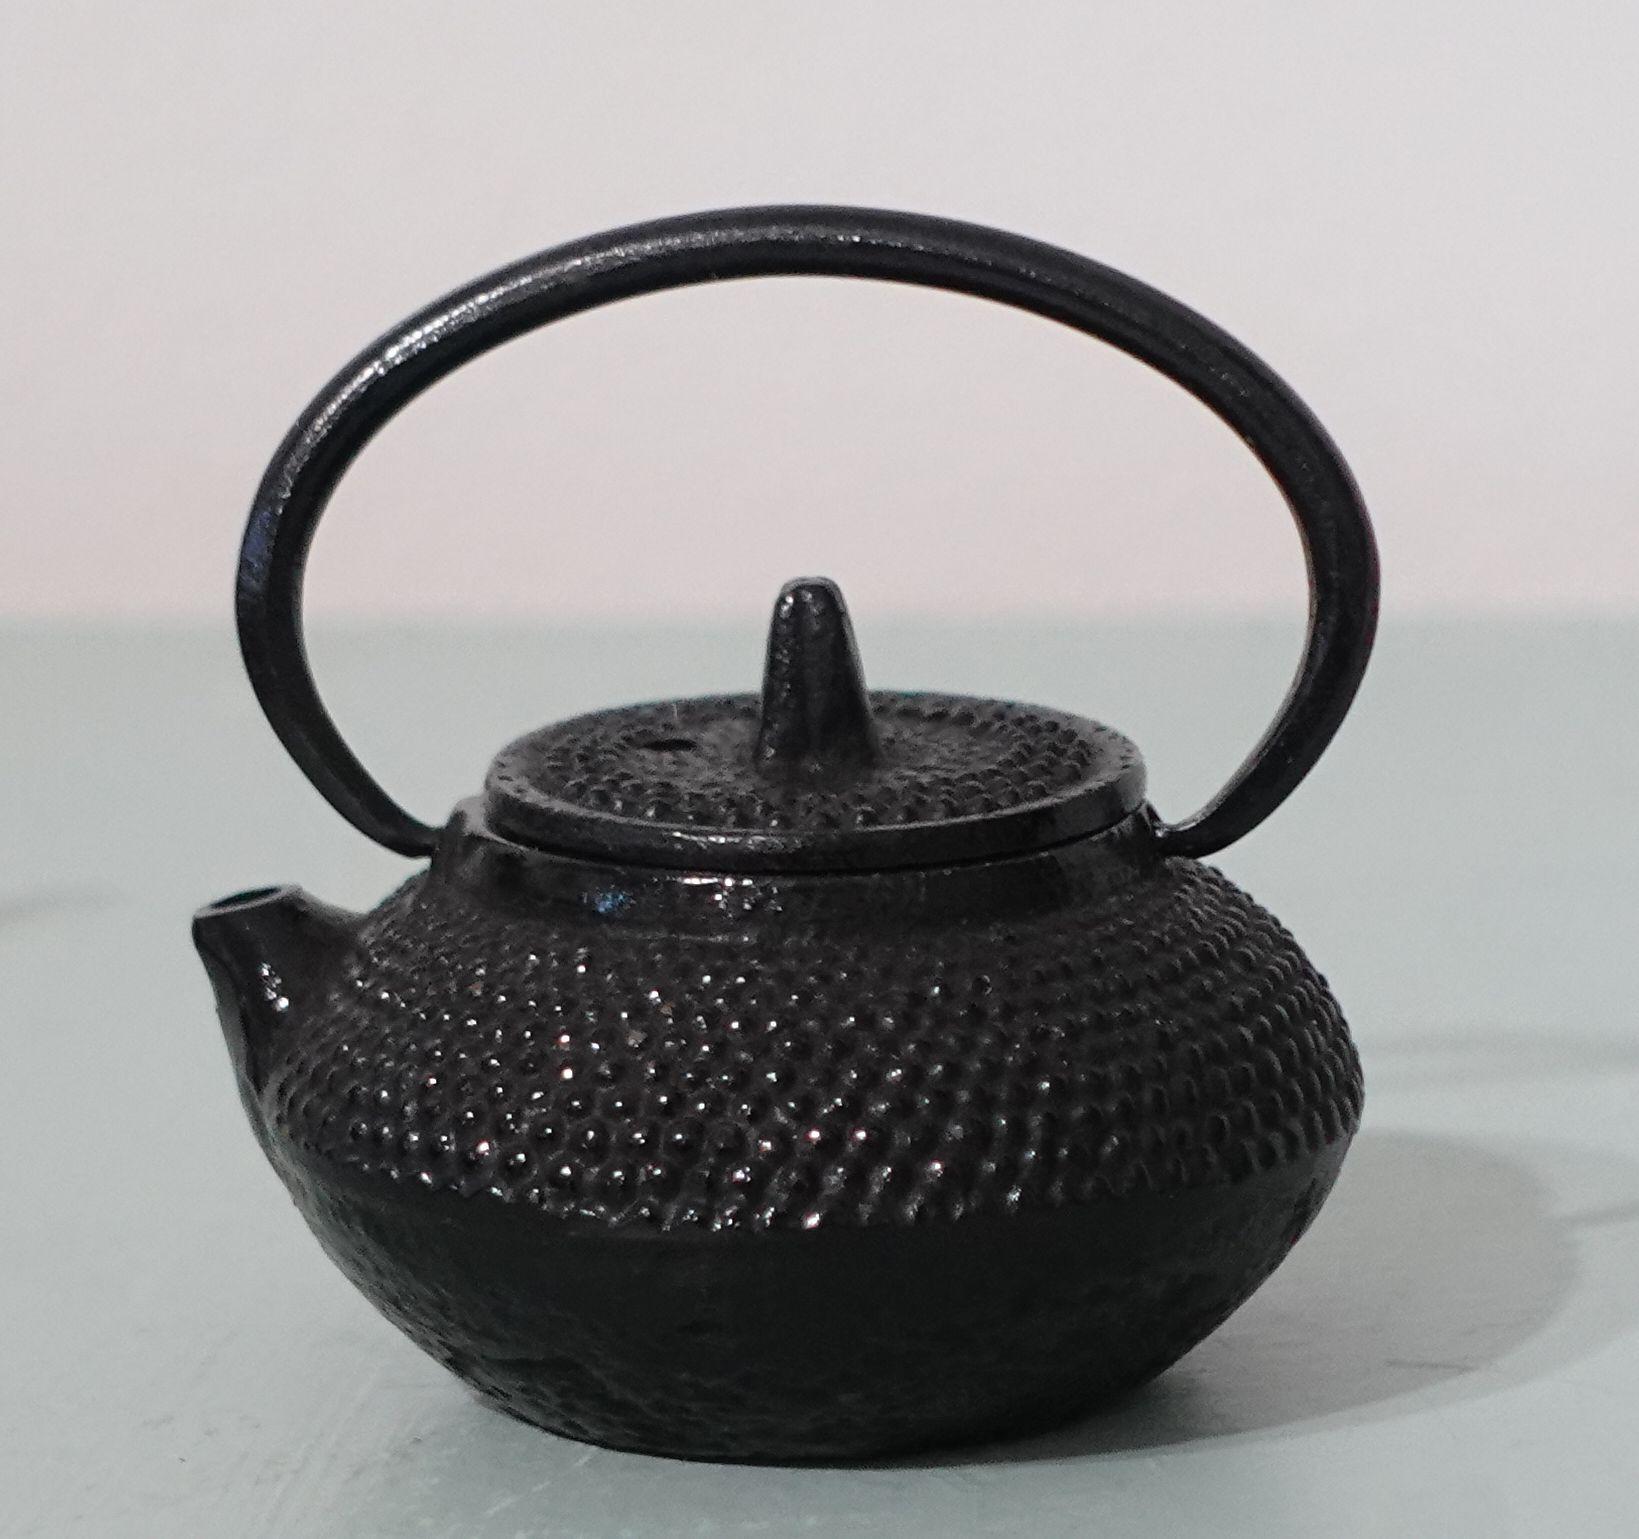 Iron teapot water dropper with the original box.
This is an old stocked item and still in its new condition in the box.